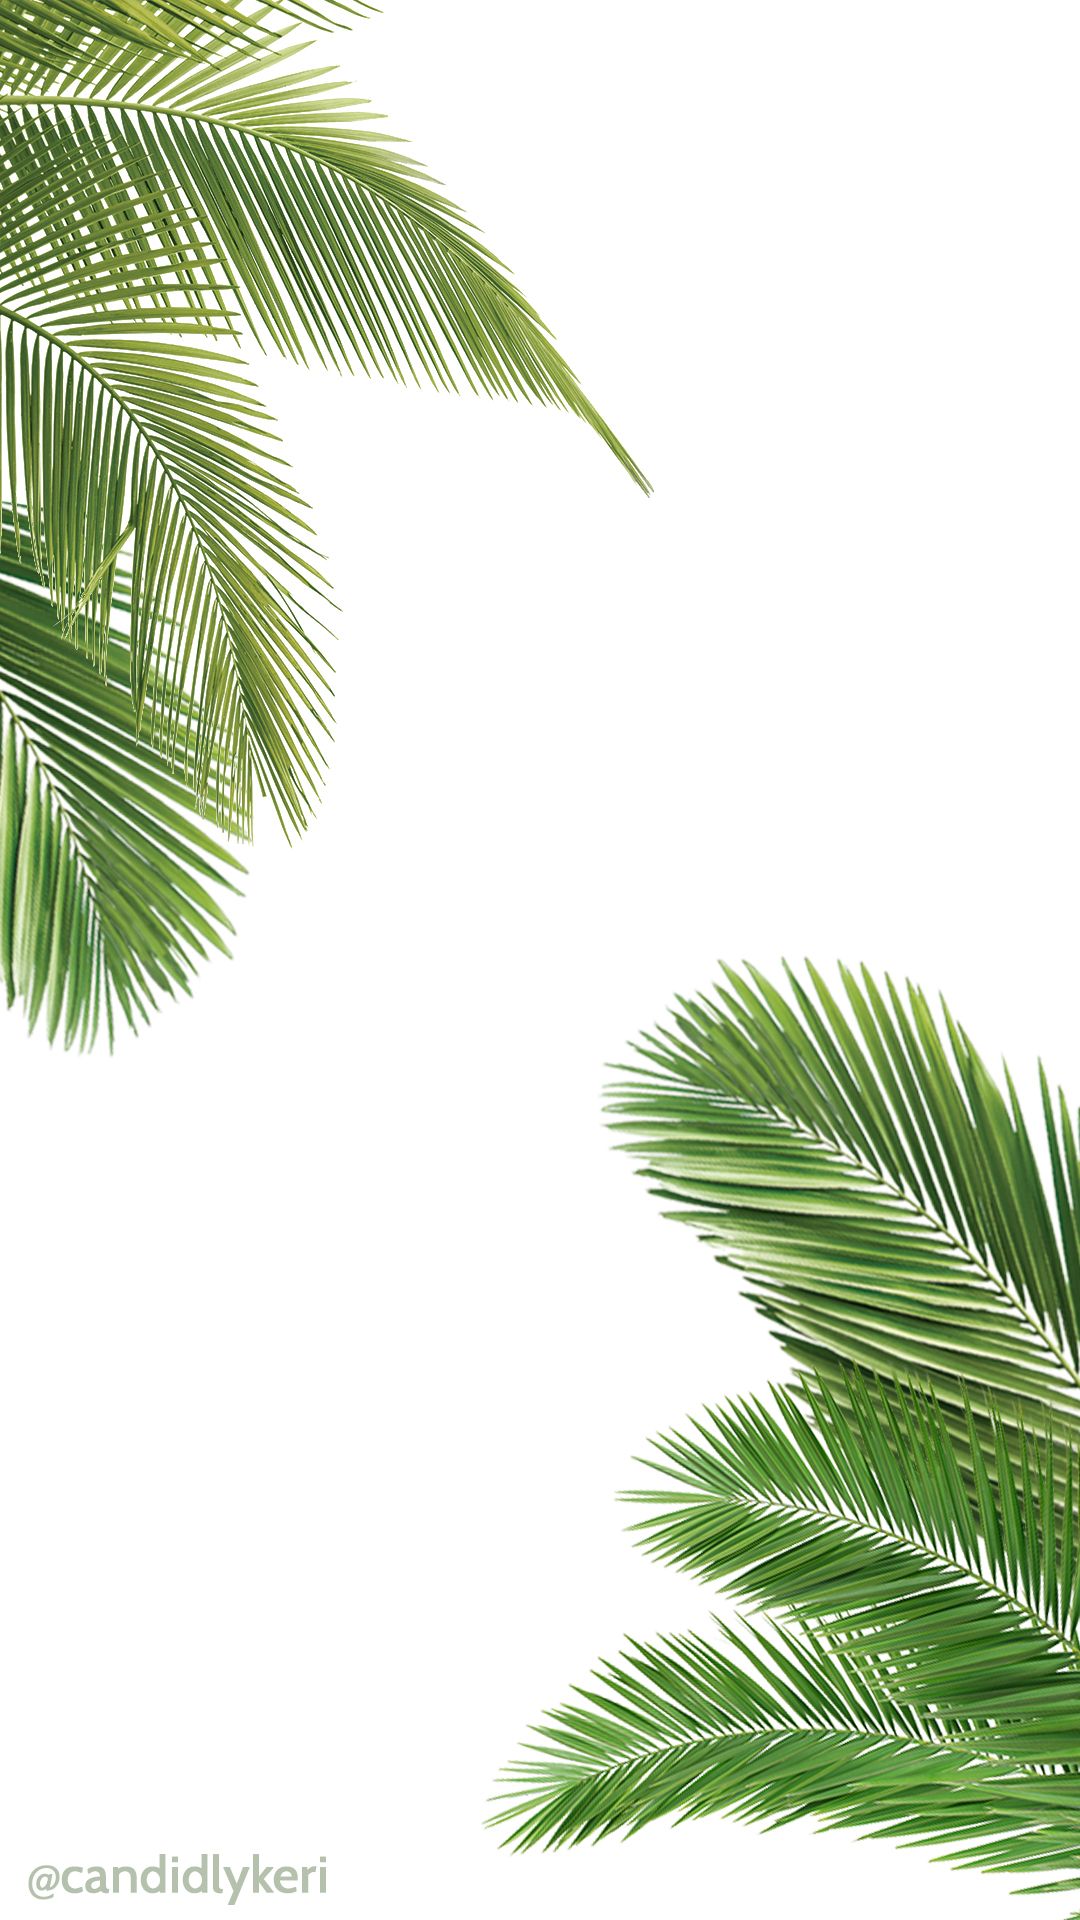 Palm Tree And White Wallpaper For iPhone Android Or